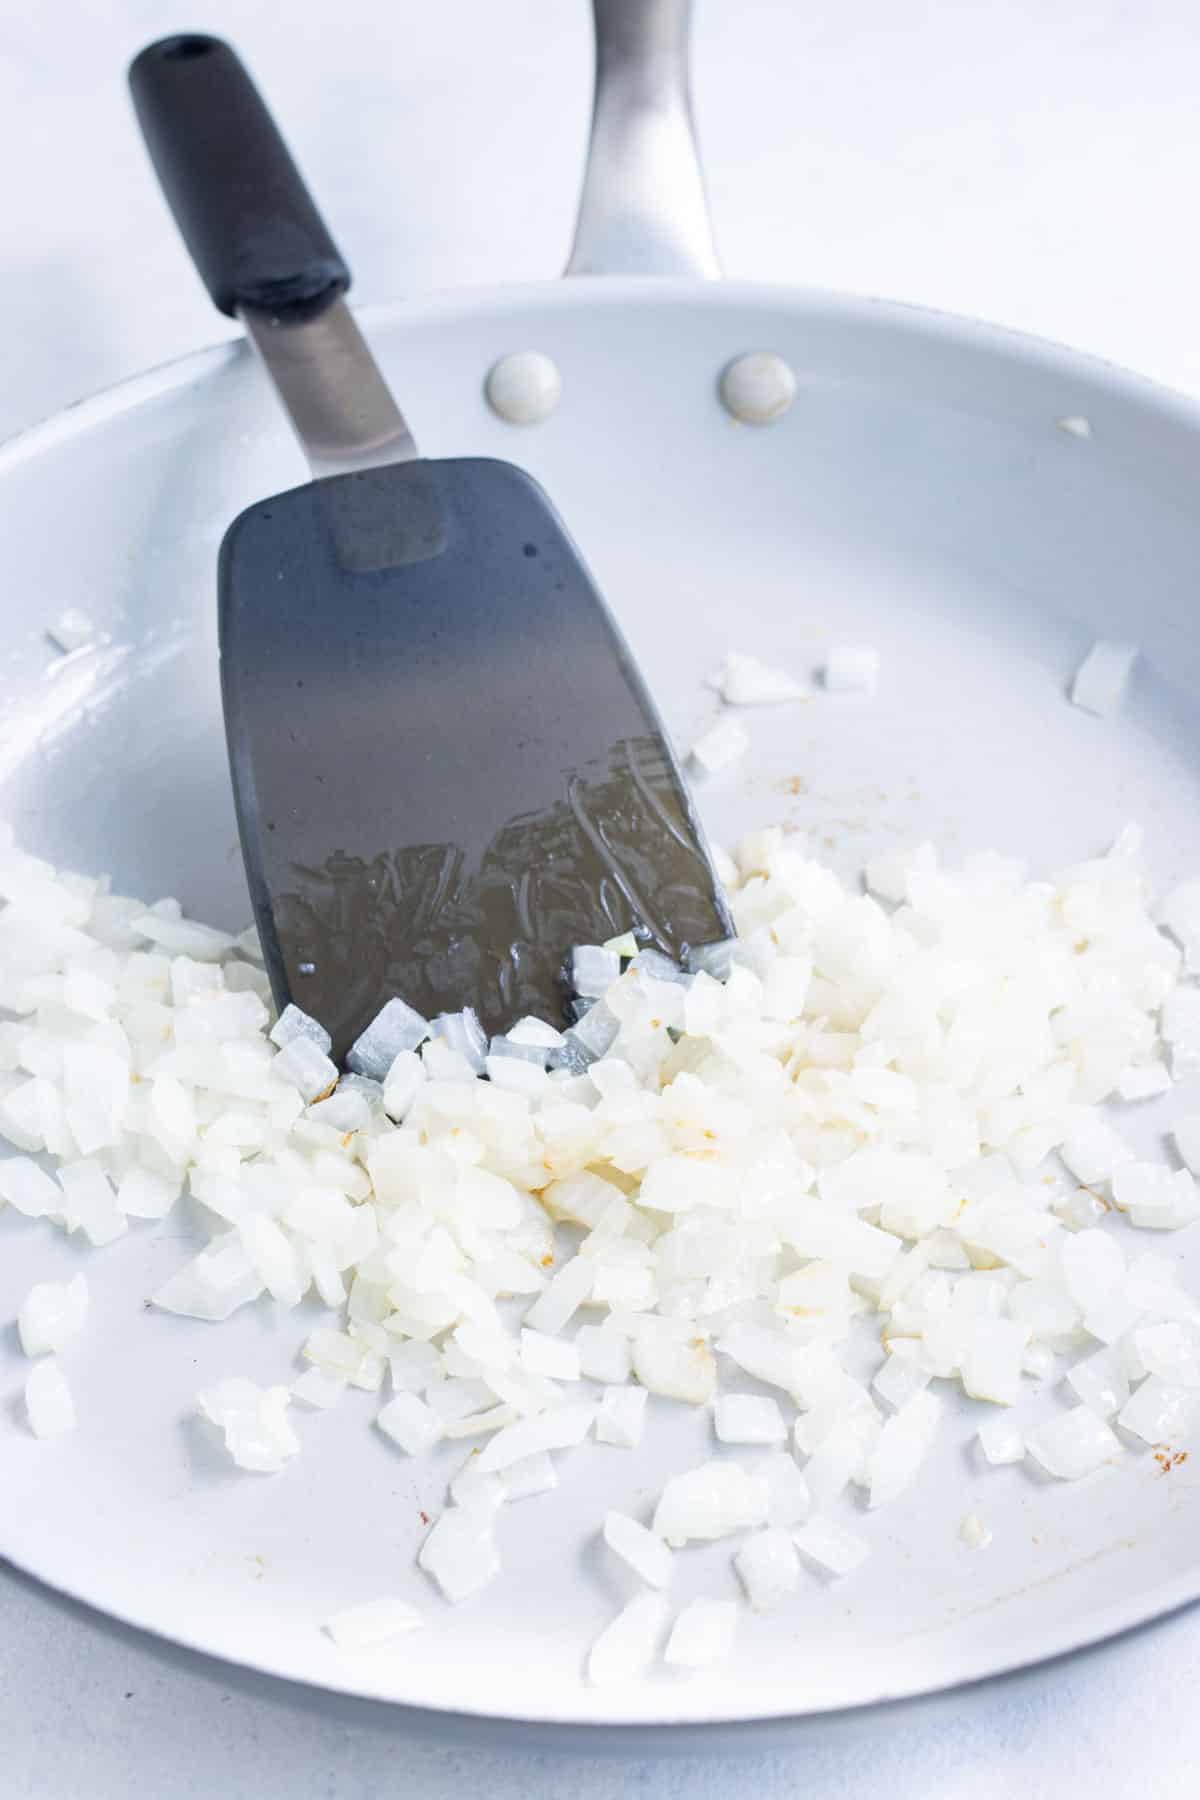 Onion and garlic are cooked in a skillet.